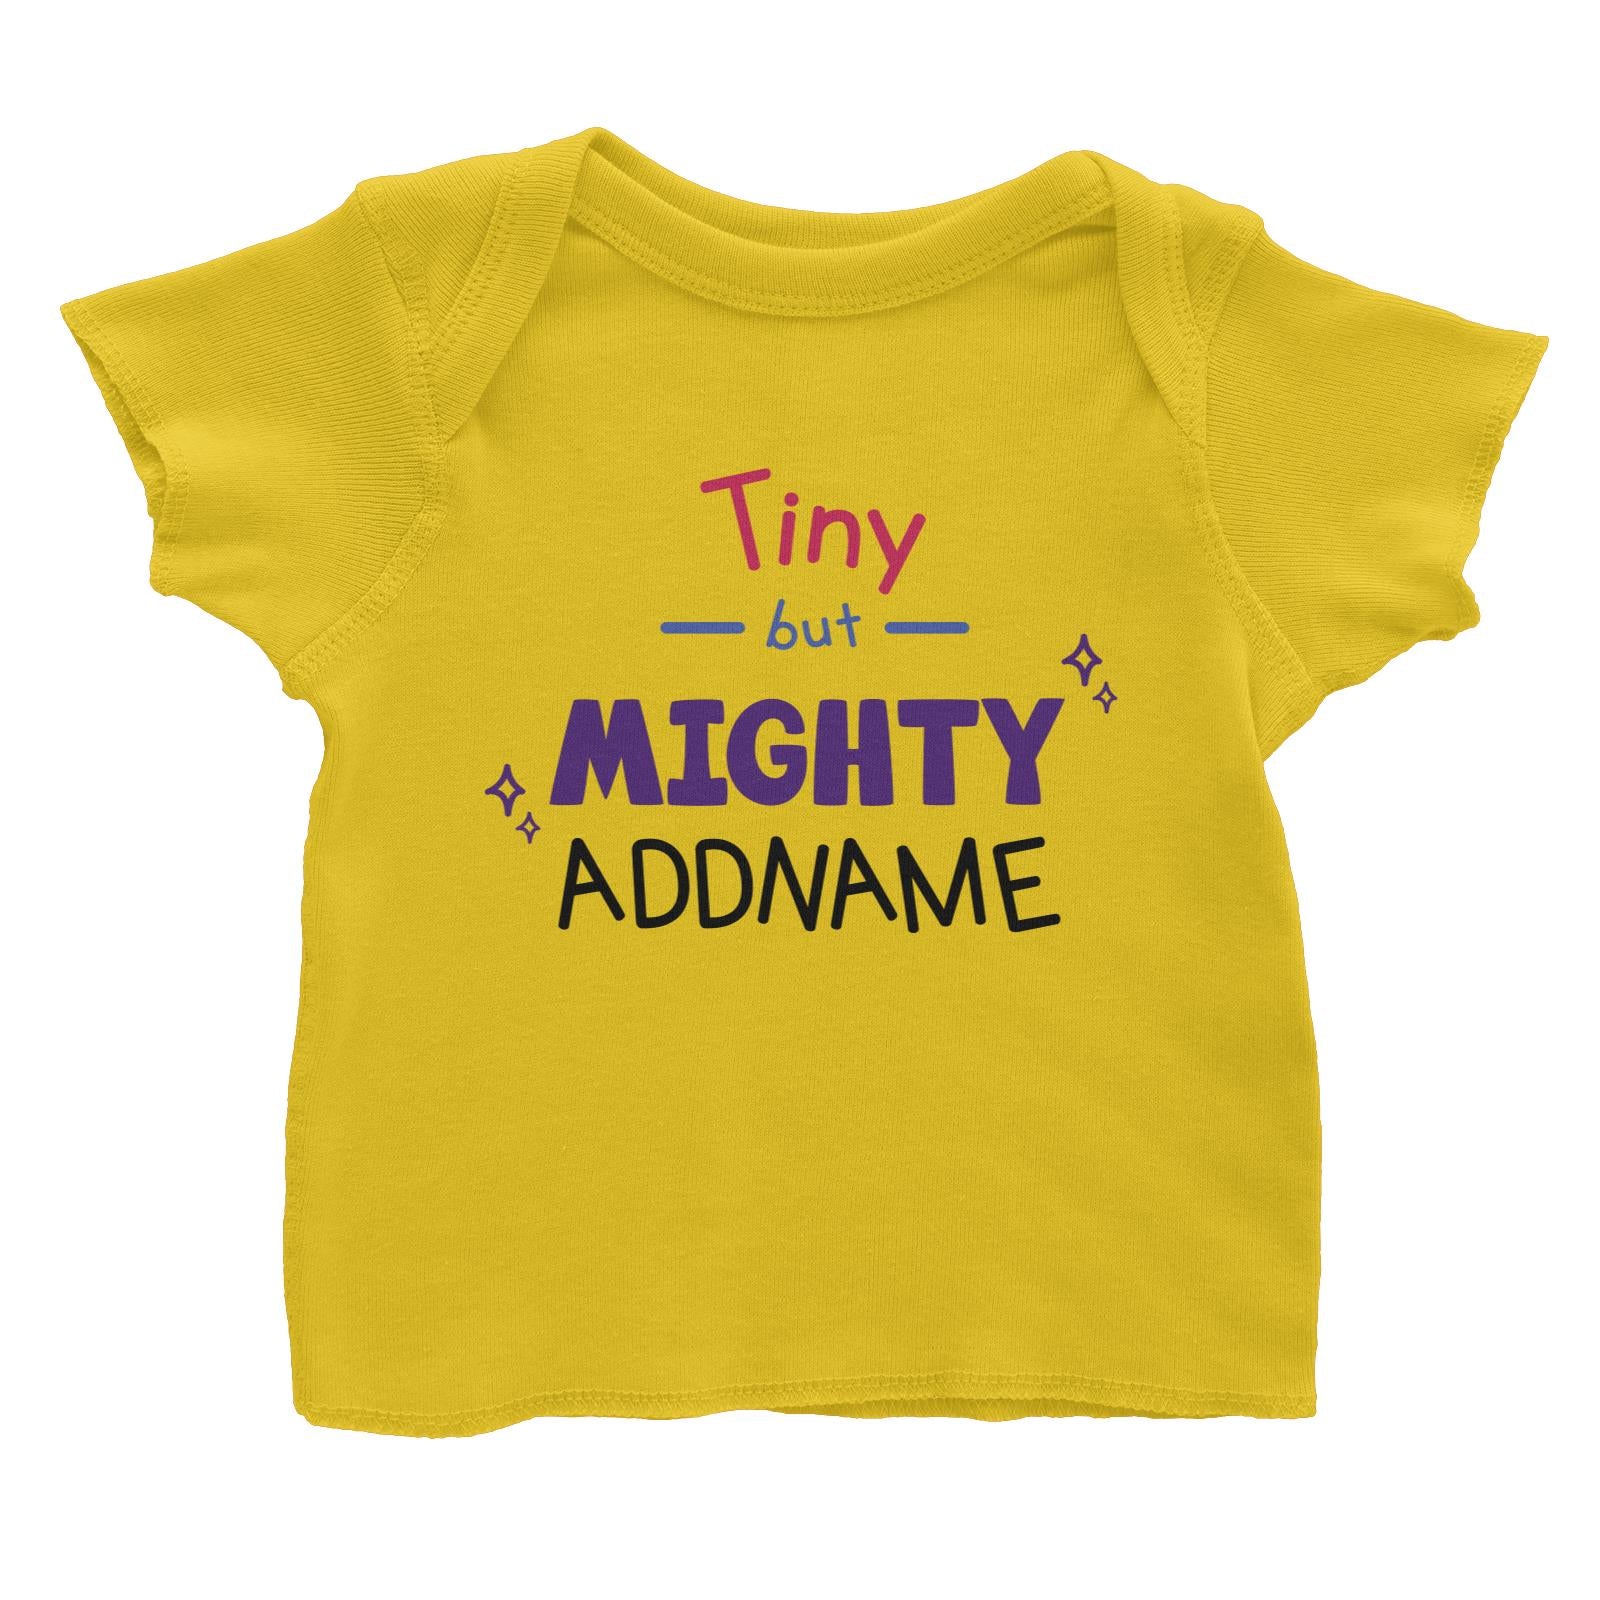 Children's Day Gift Series Tiny But Mighty Addname Baby T-Shirt